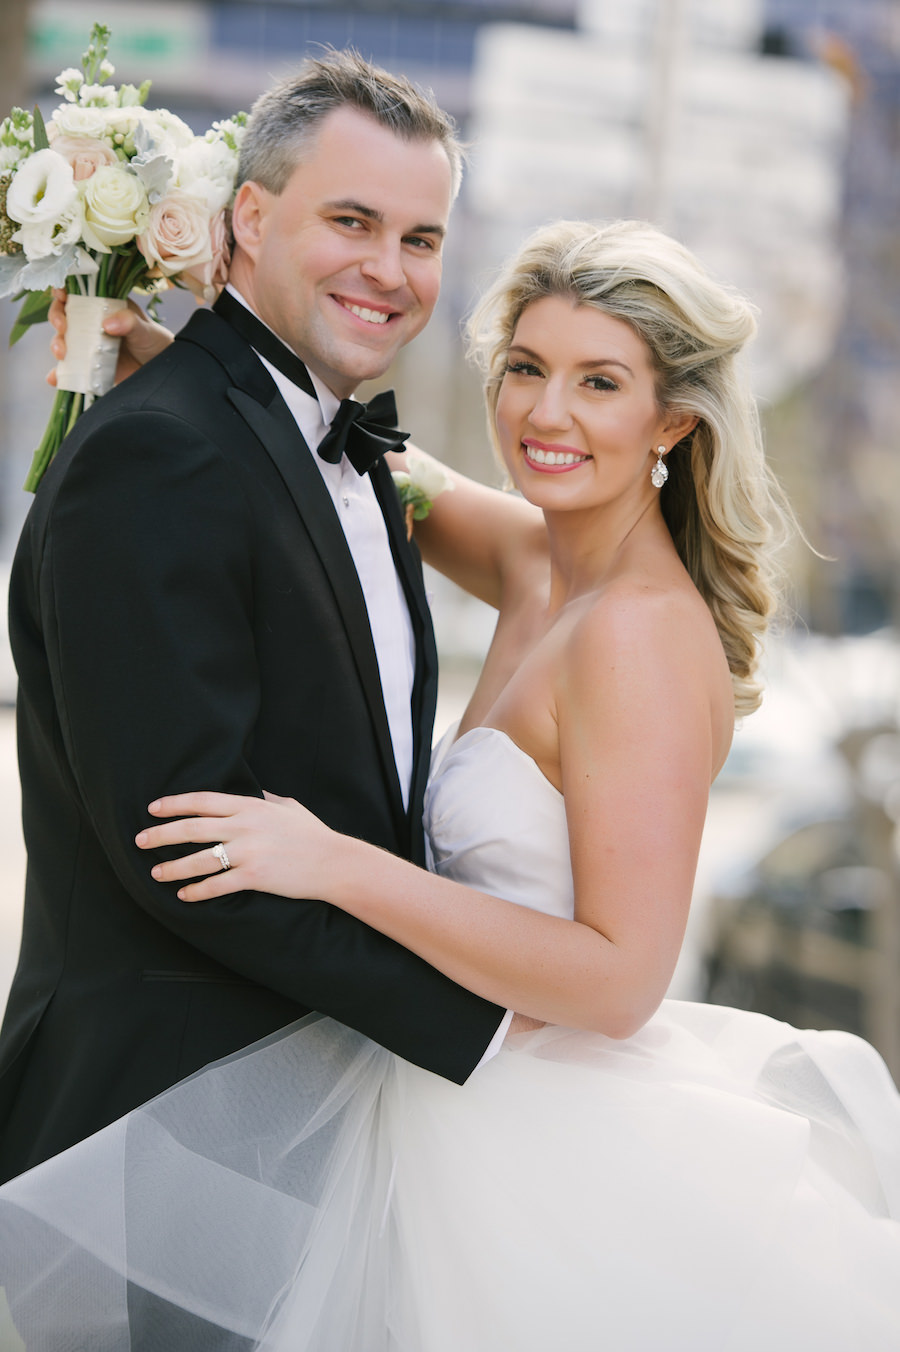 Bride and Groom Wedding Portrait in Black Tuxedo and White Strapless Sweetheart Hayley Paige Wedding Dress